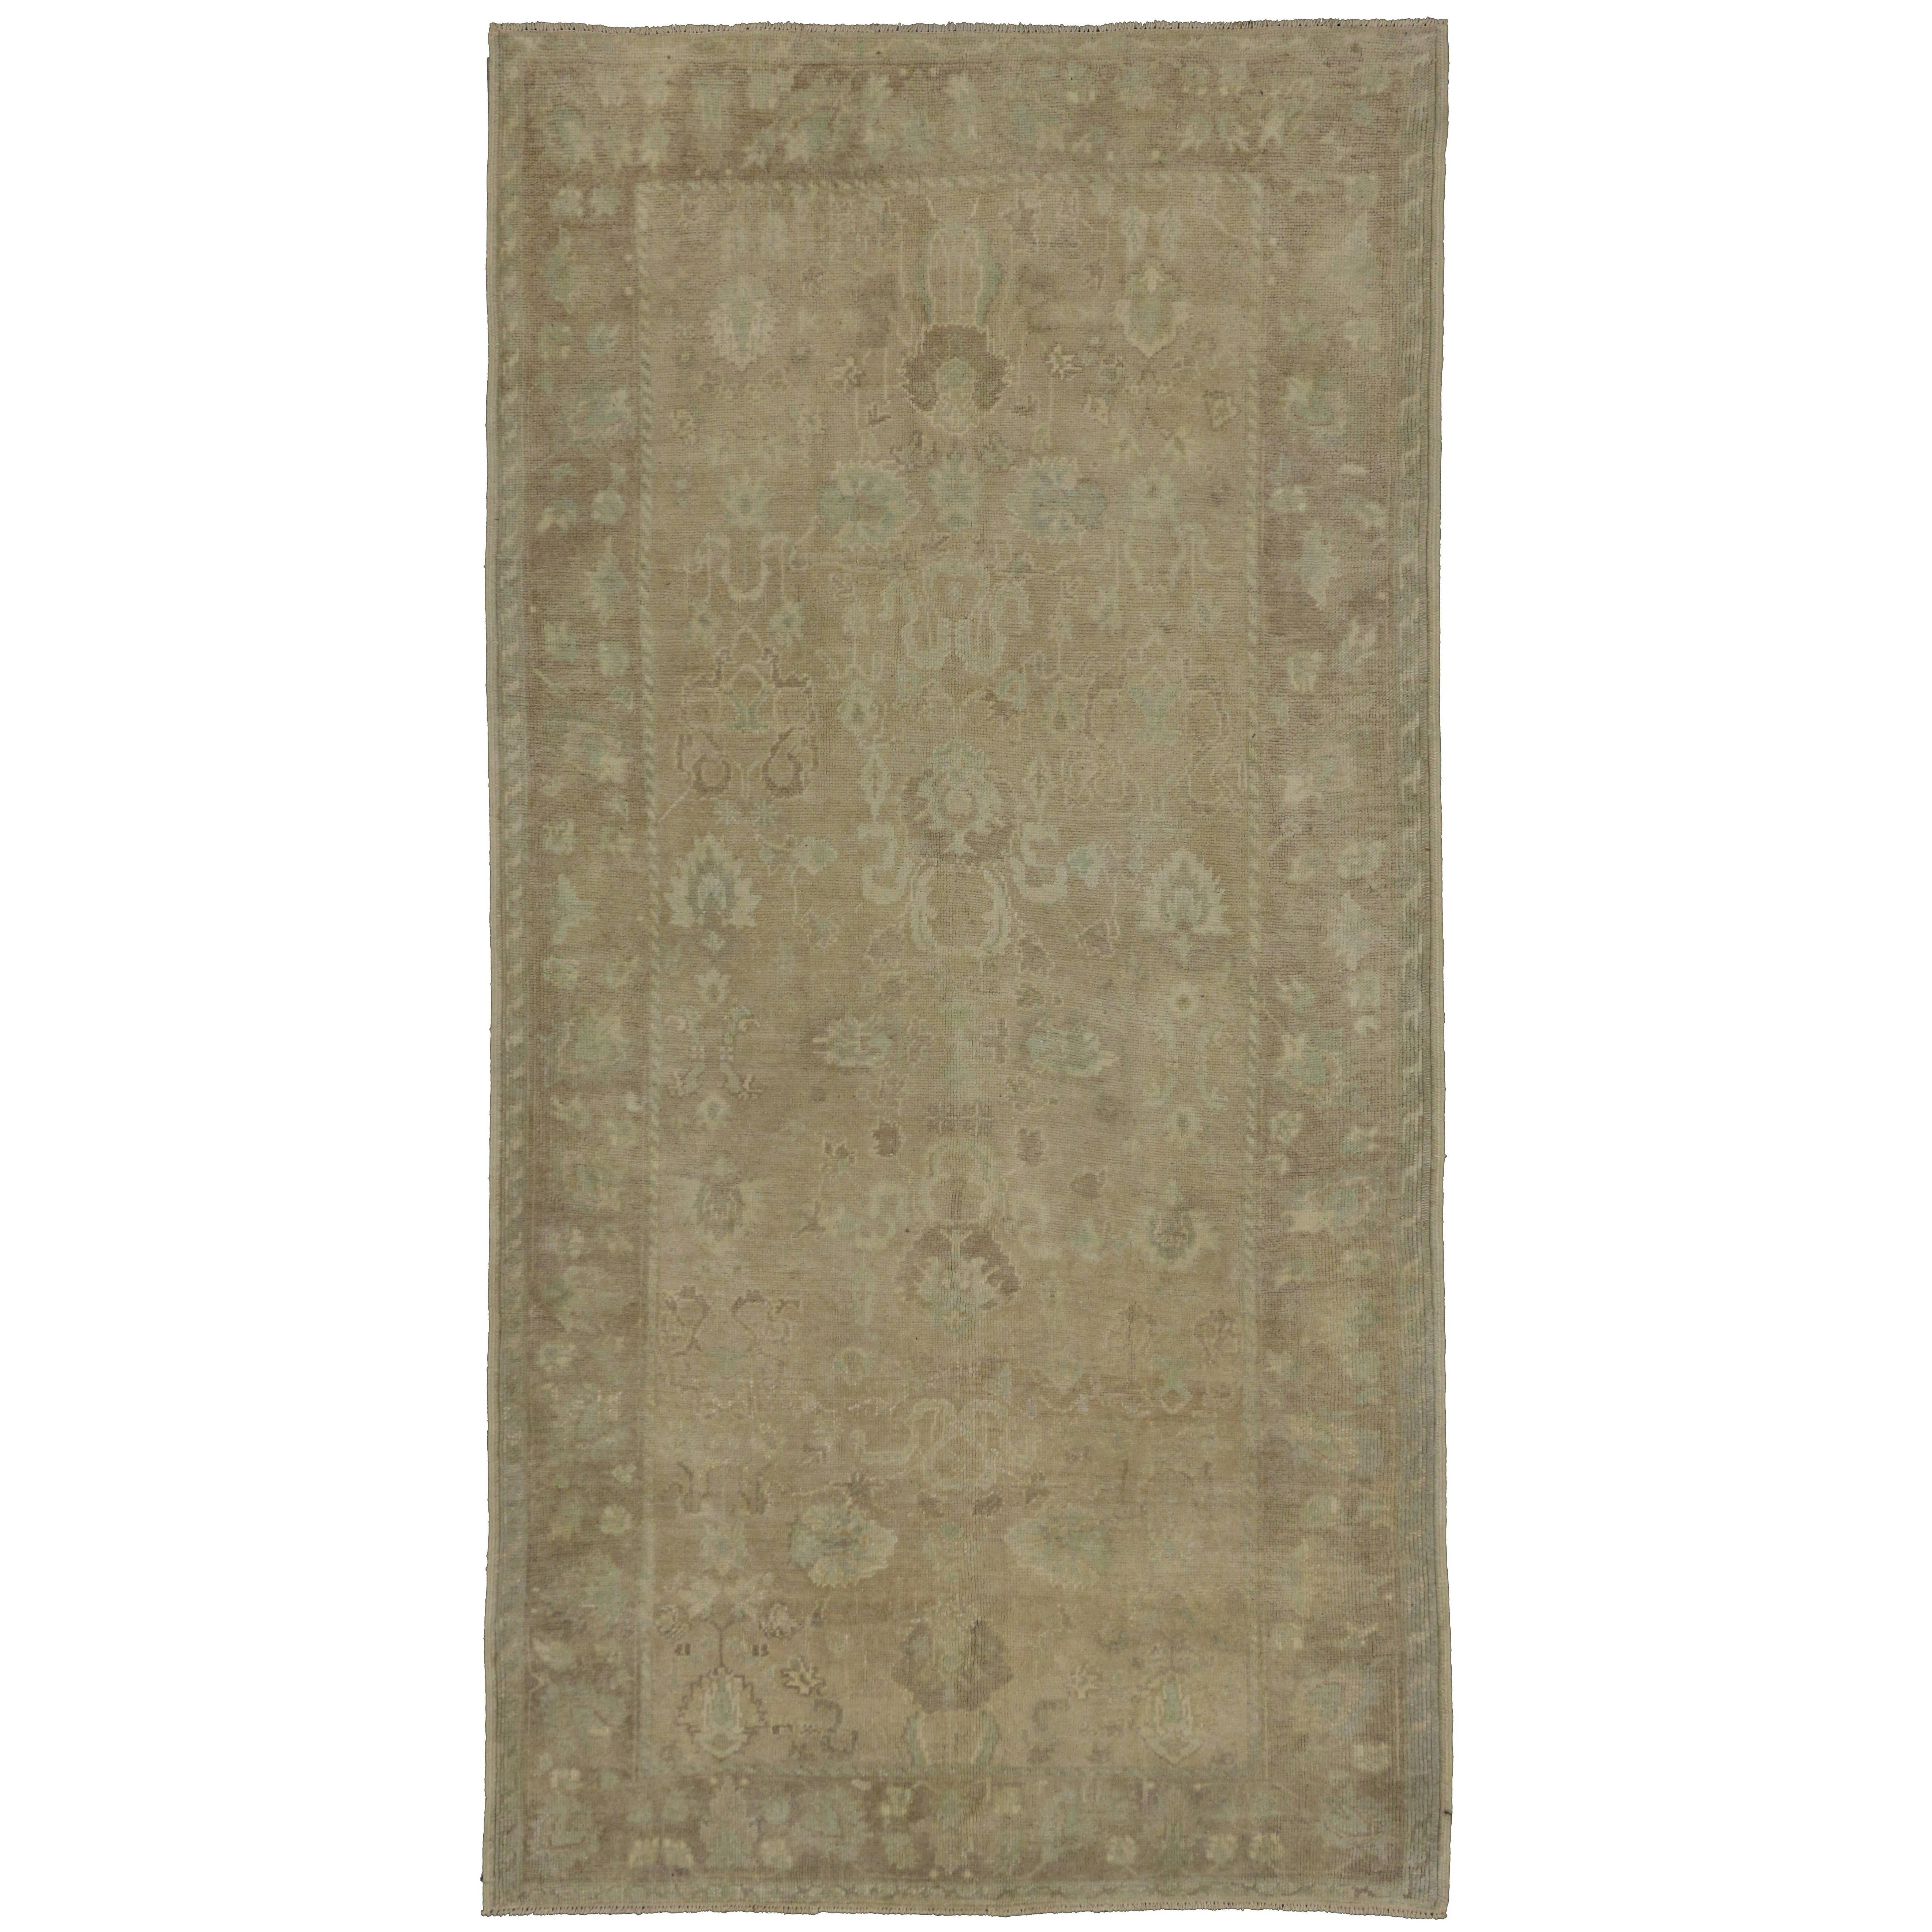 Vintage Turkish Oushak Rug with Minimalist French Country Cottage Style In Good Condition For Sale In Dallas, TX